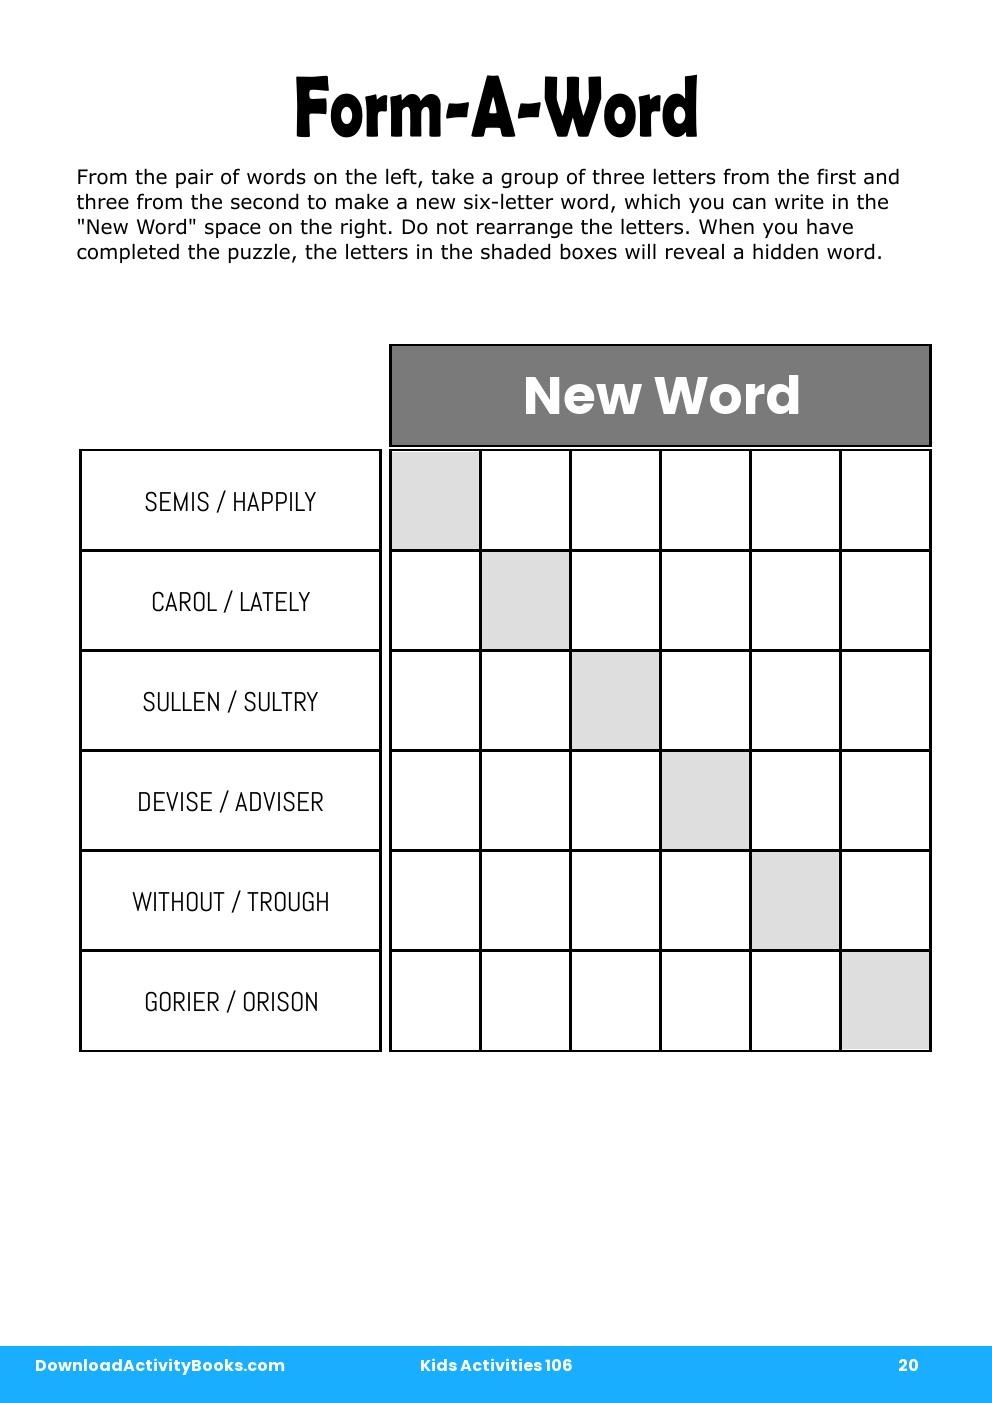 Form-A-Word in Kids Activities 106